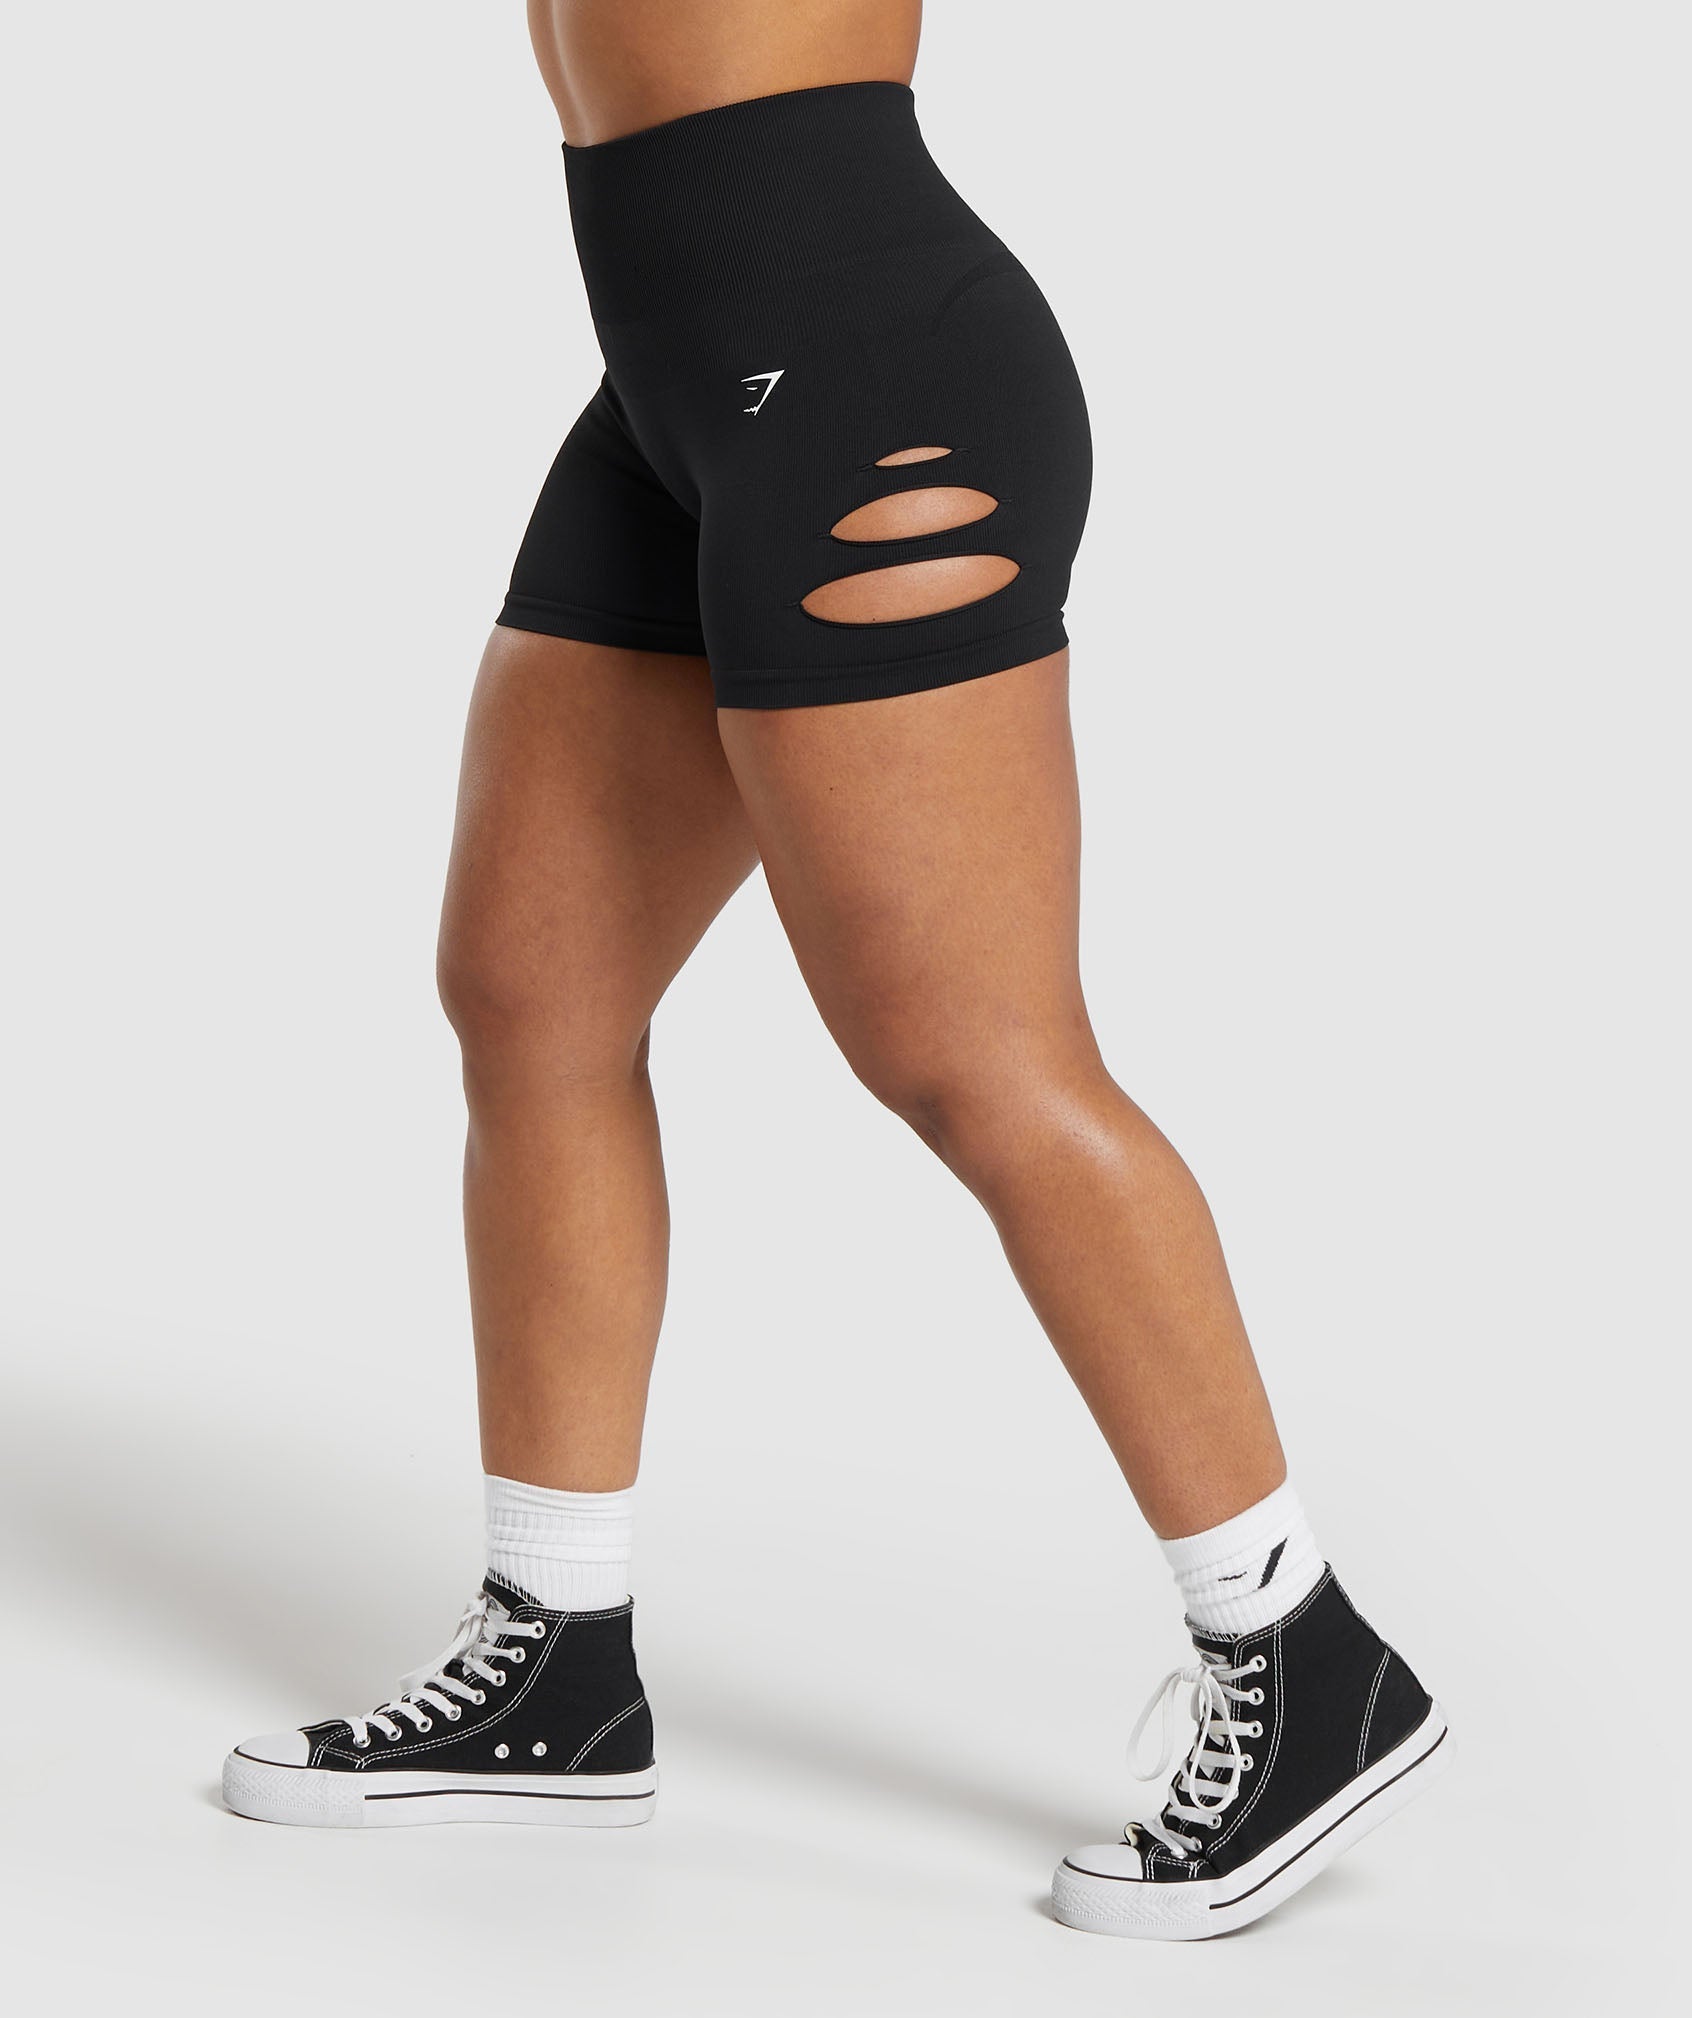 Gains Seamless Ripped Shorts in Black